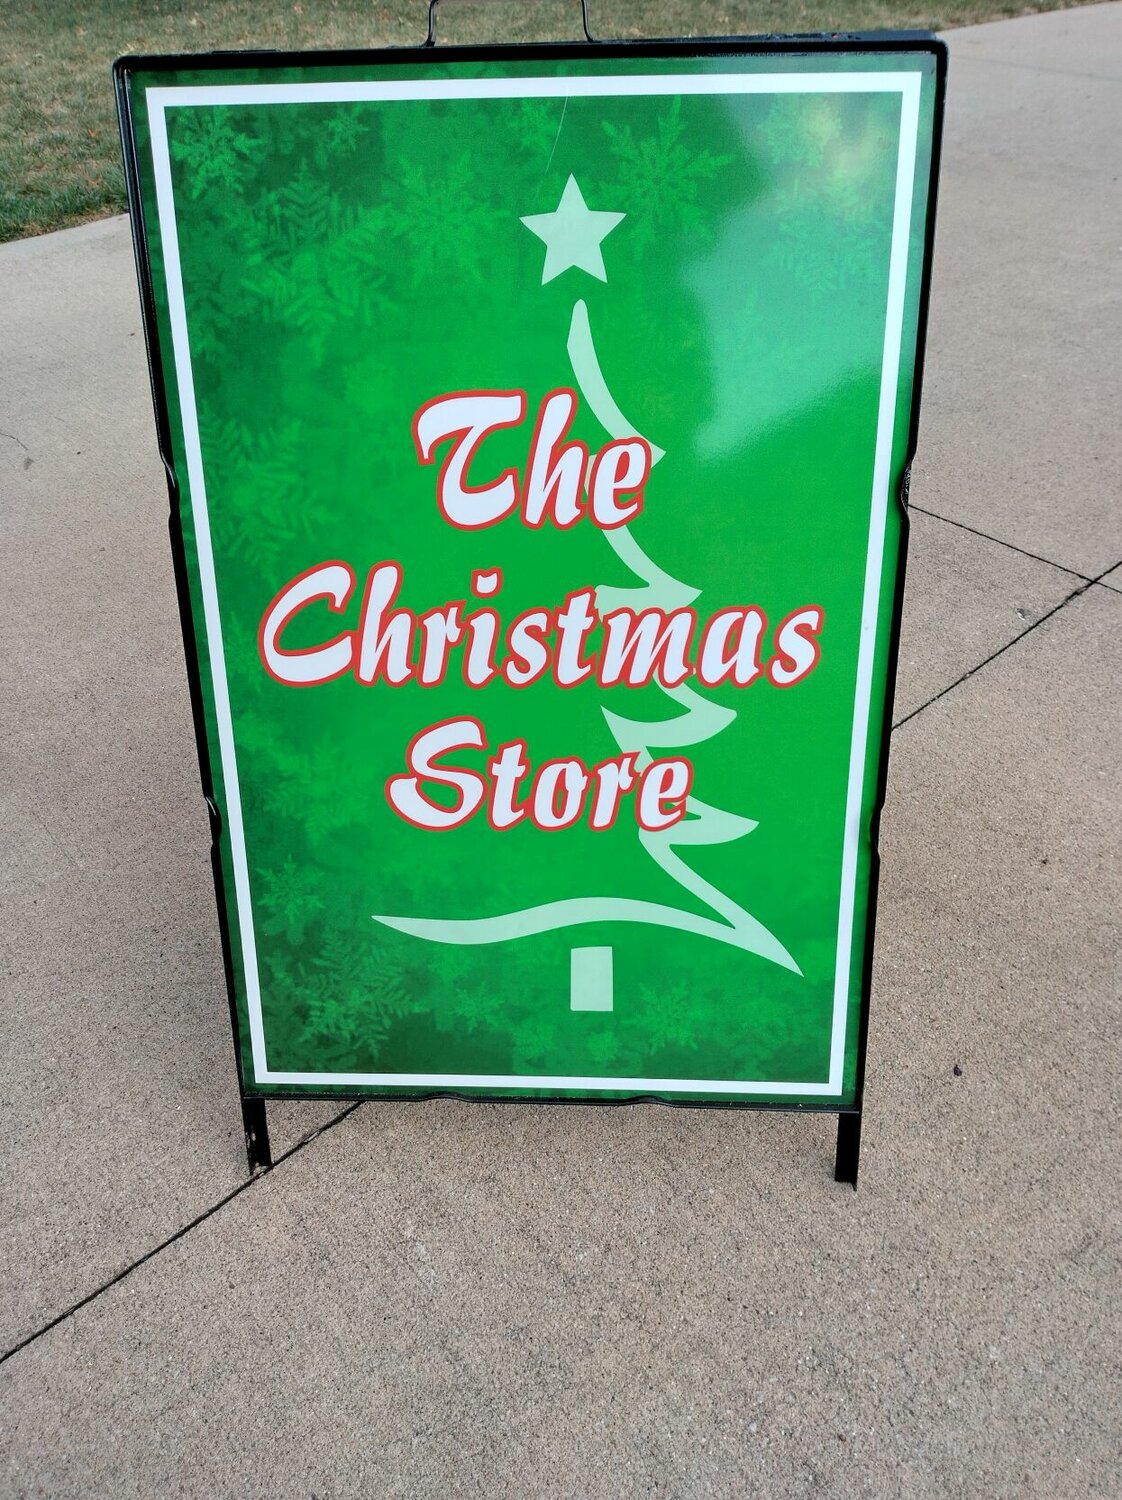 This year, the Christmas Store is celebrating 50 years of serving Johnson County residents in need during the holiday season.